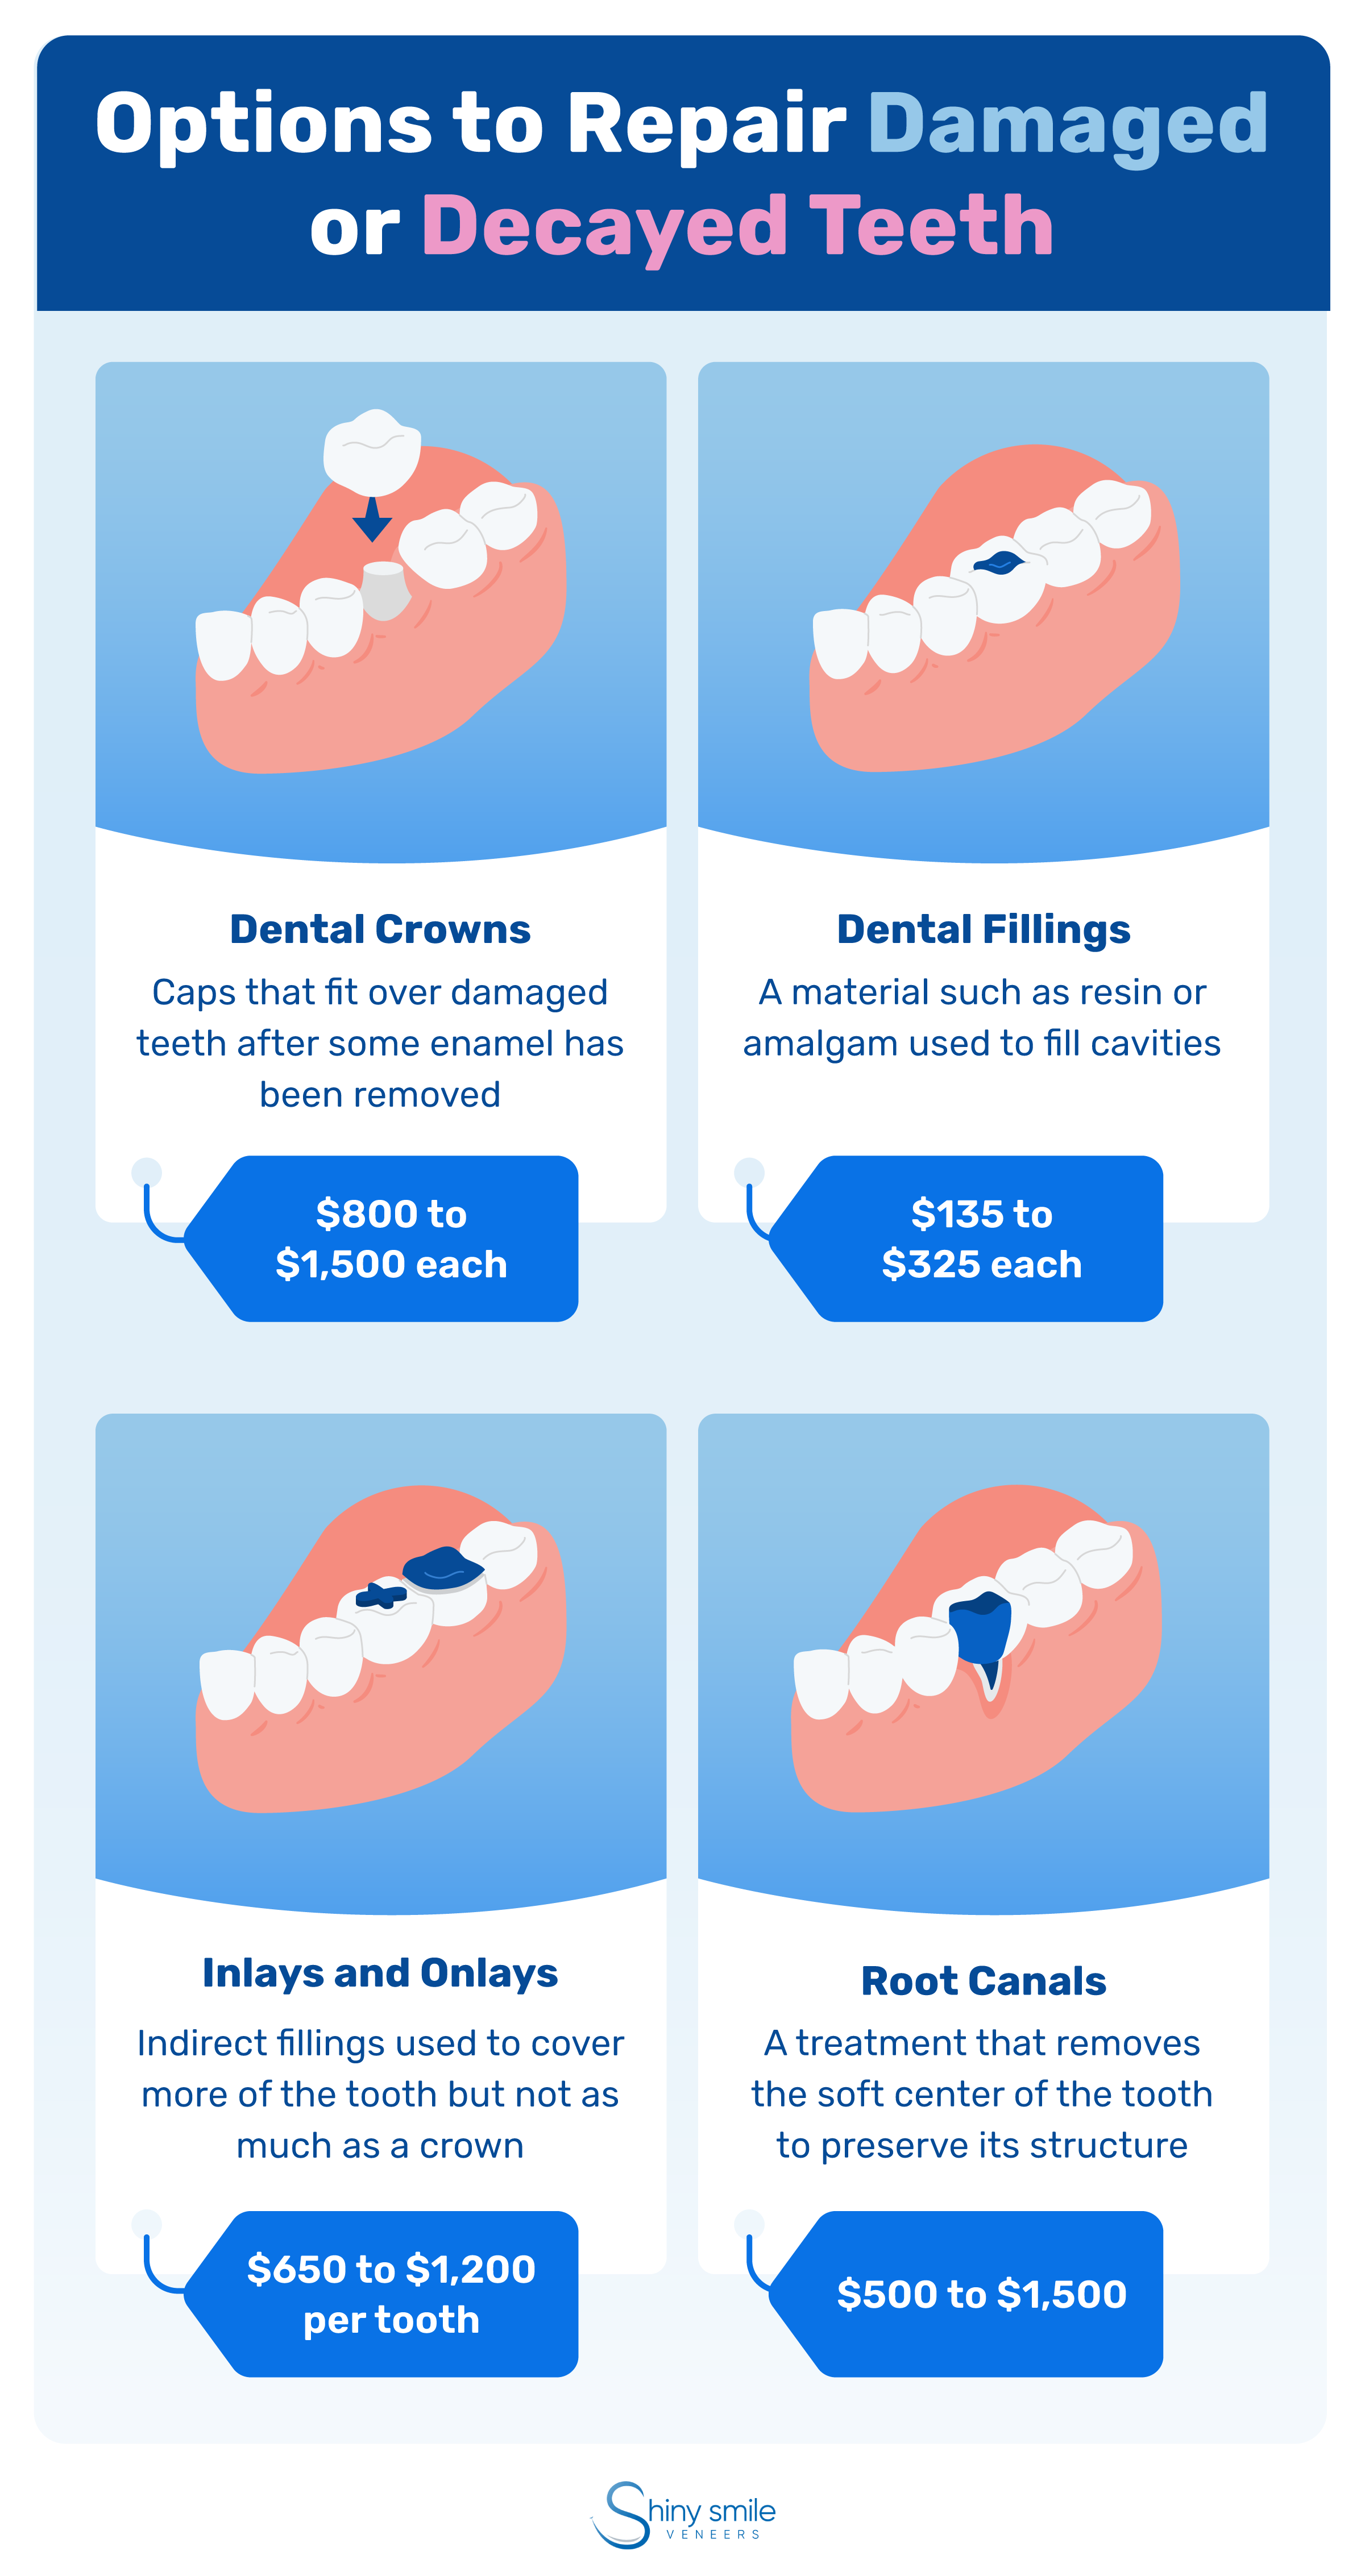 Options to repair damaged or decayed teeth